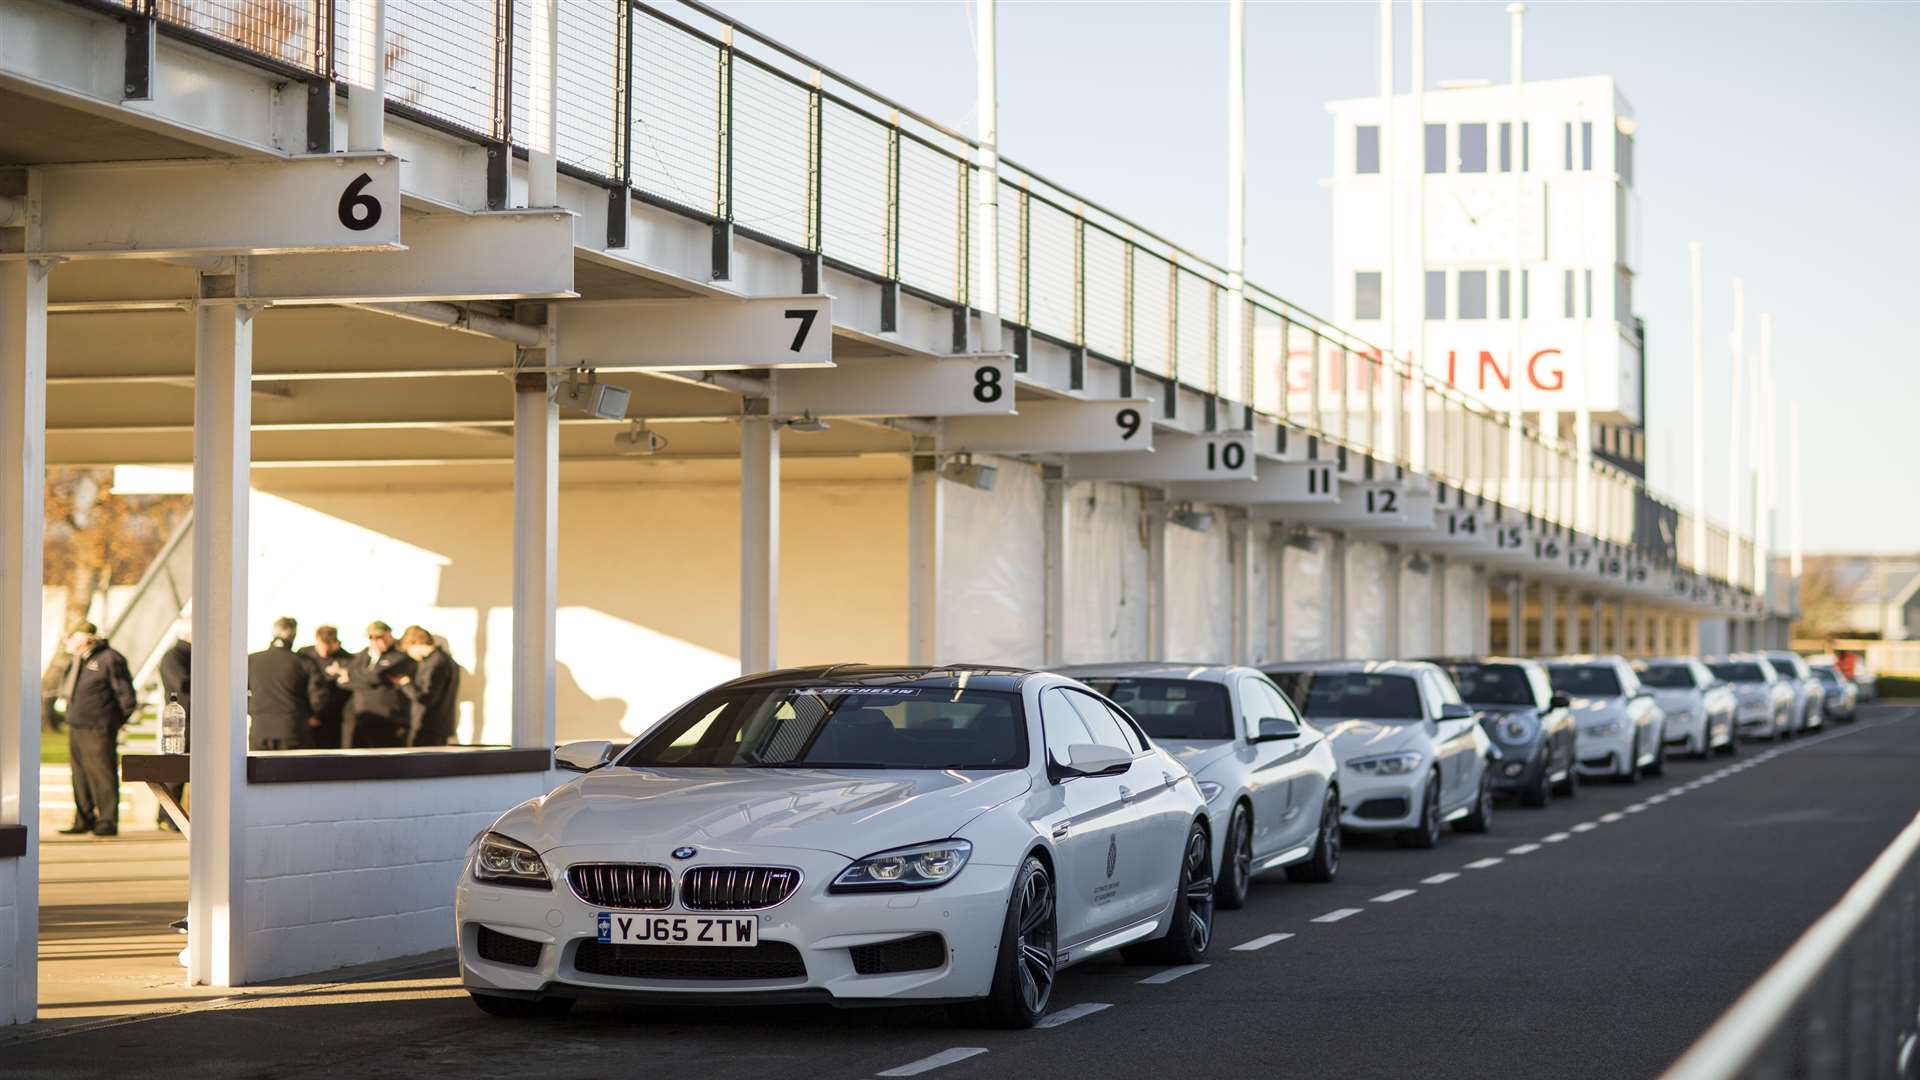 A range of BMWs can be driven at Goodwood